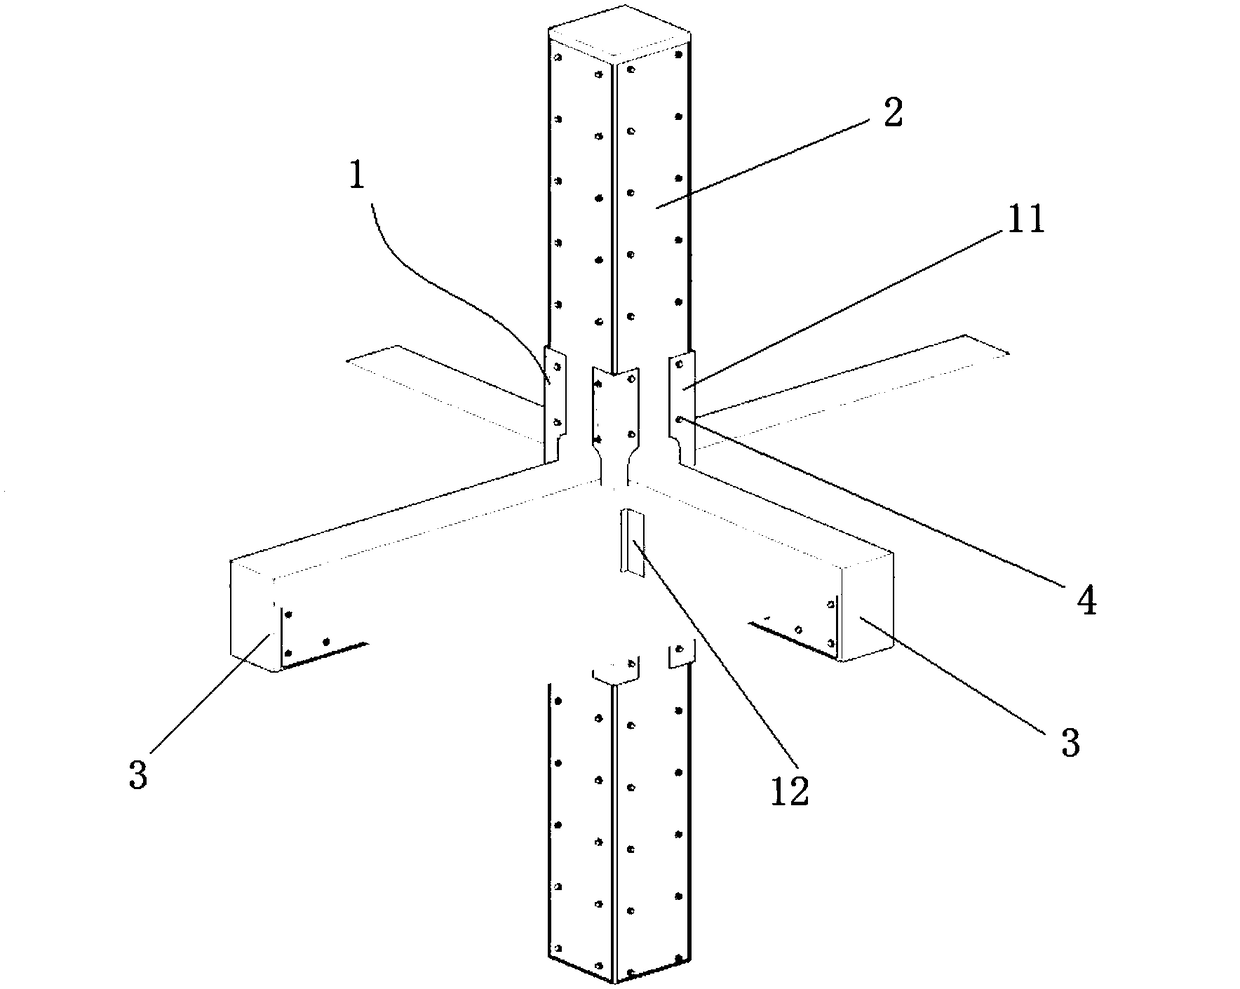 Externally-wrapped anchor steel reinforcement structure for concrete beam and column joint